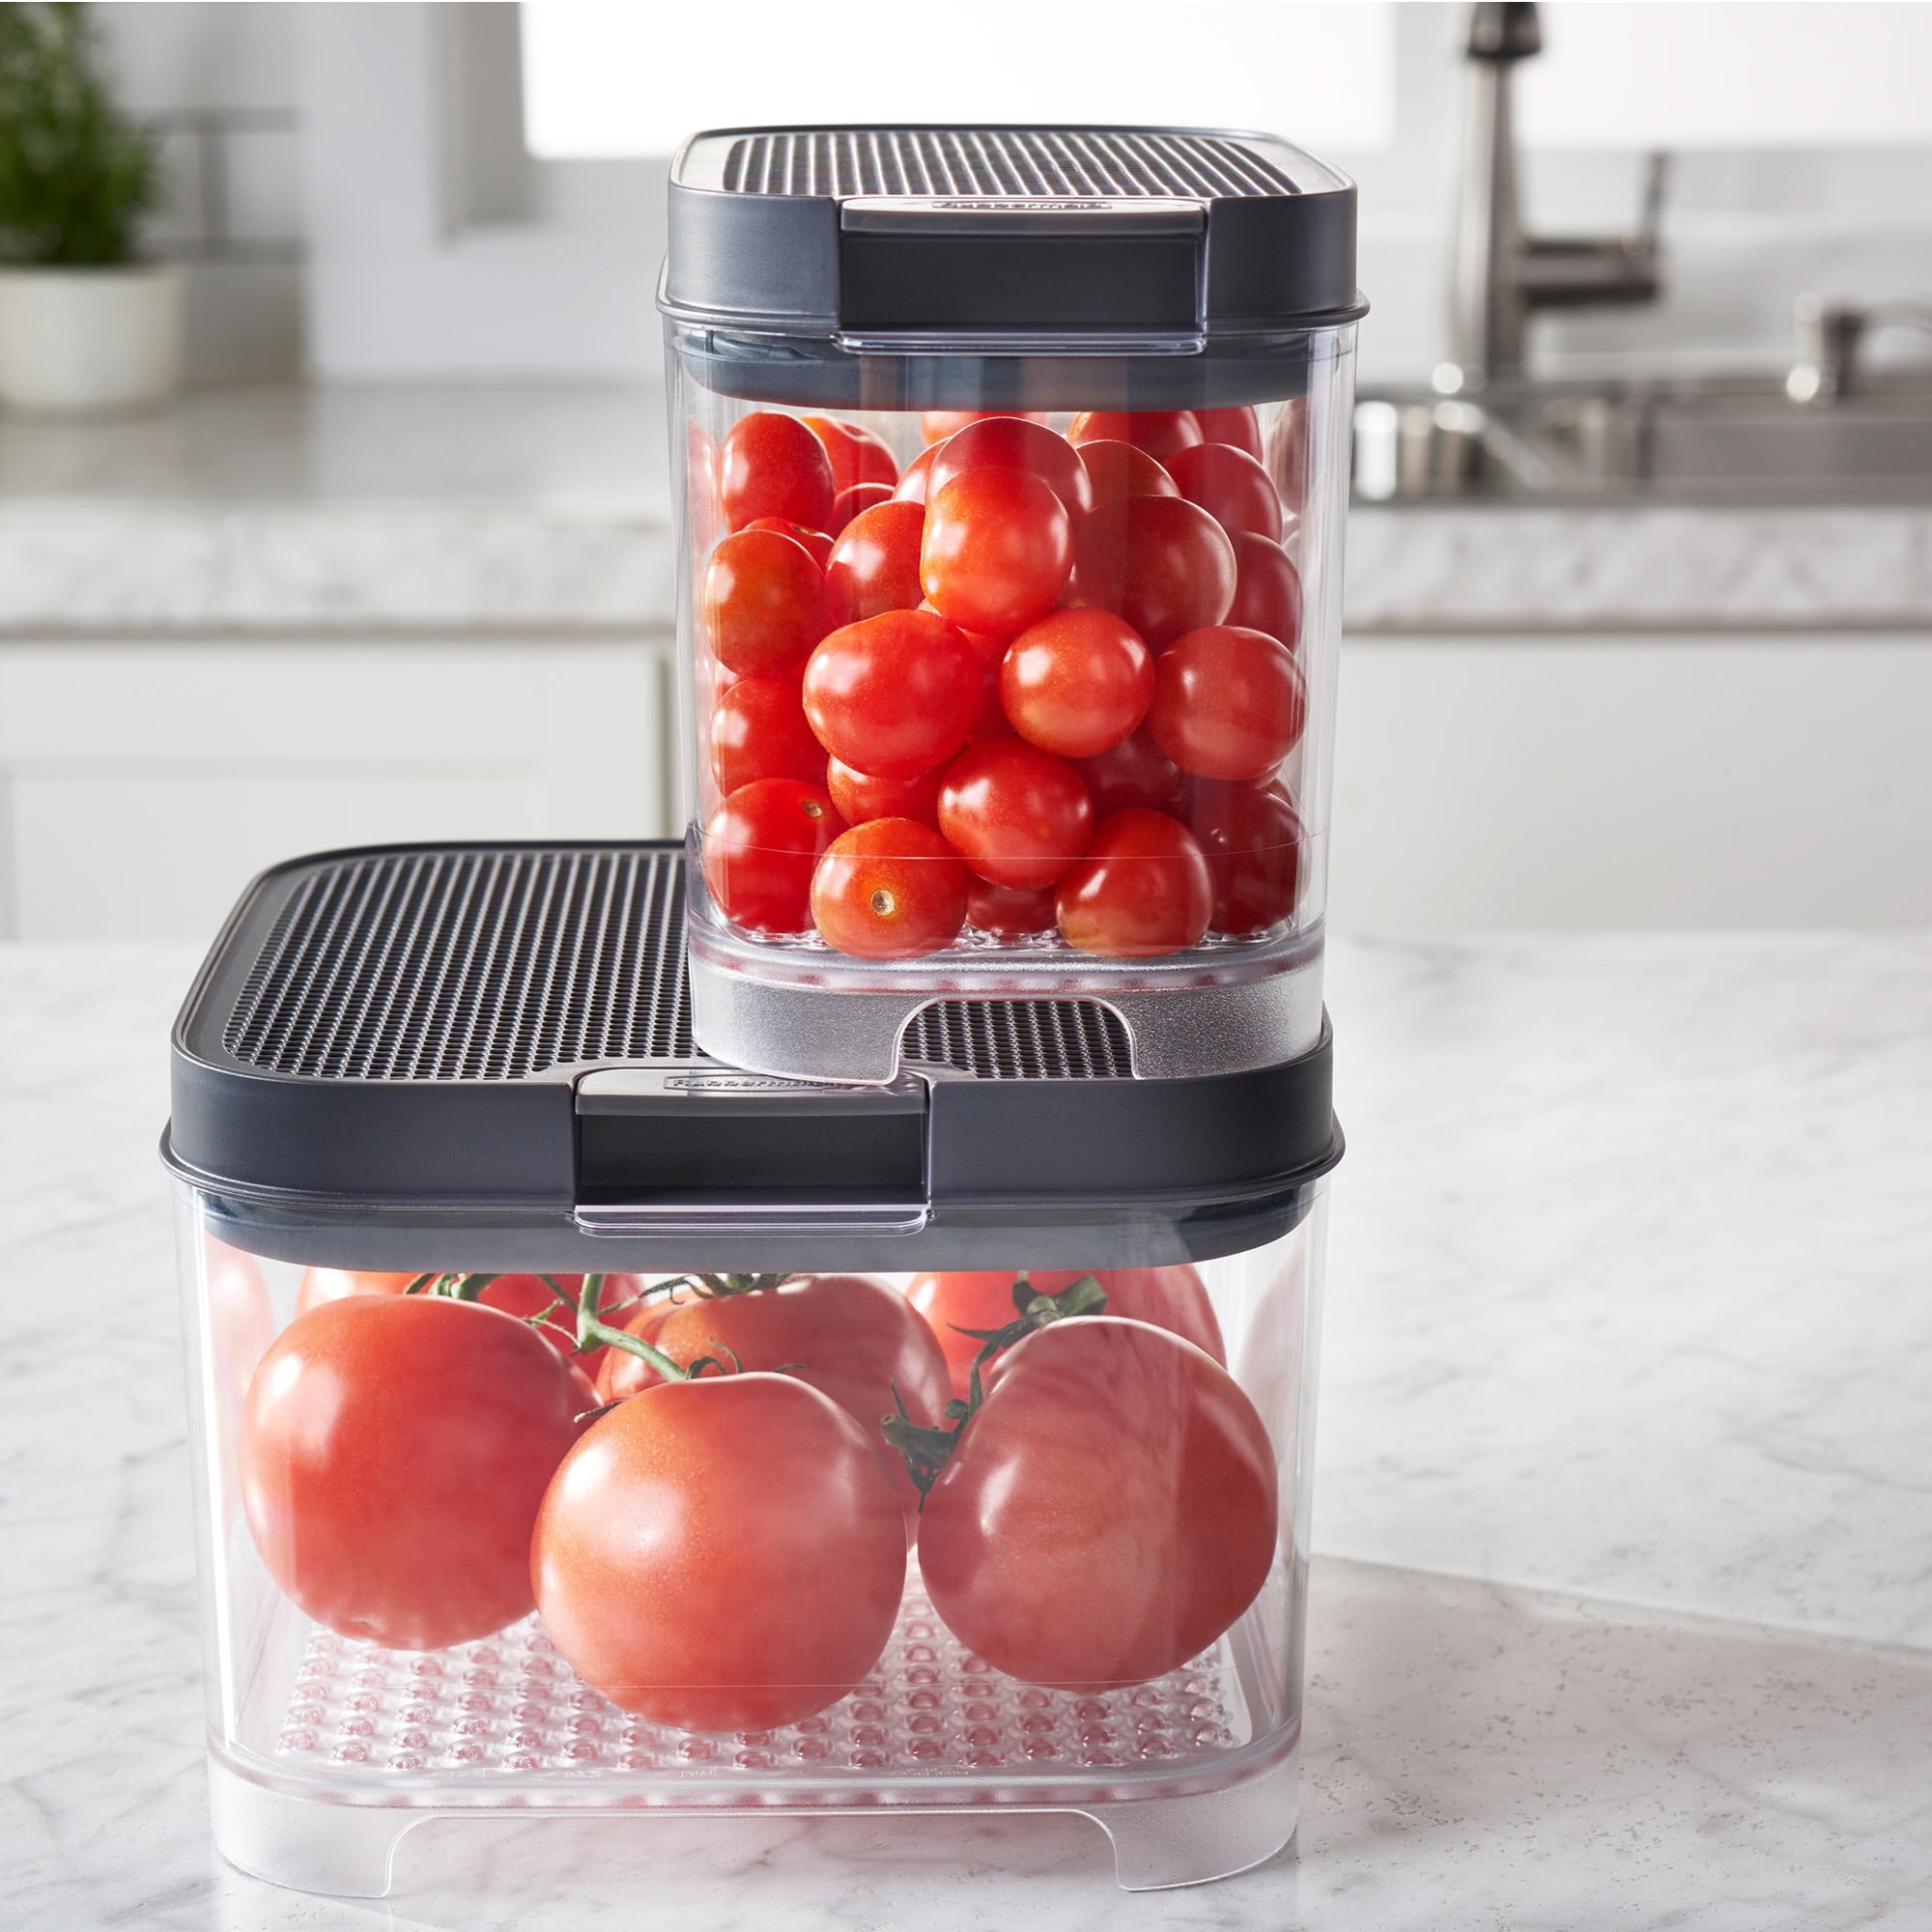 Rubbermaid FreshWorks Produce Saver Food Storage Containers 8 Piece Set-New